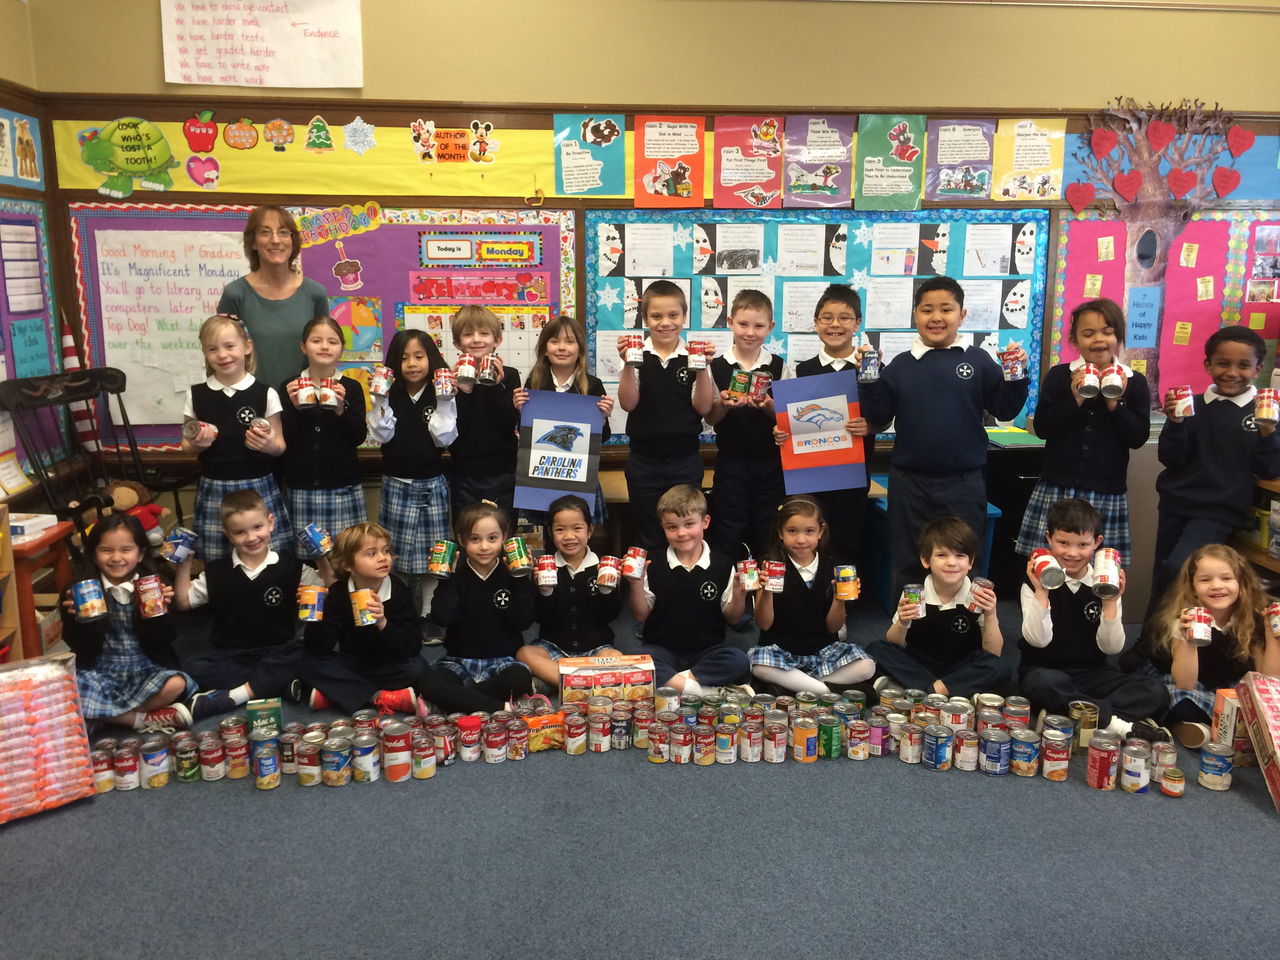 Vicki Weatherbie’s first-grade class from Immaculate Conception Our Lady of Perpetual Help School collected 300 cans of soup for the St. Vincent de Paul food bank as part of a “Souper Bowl” fundraiser leading up to Super Bowl 50.